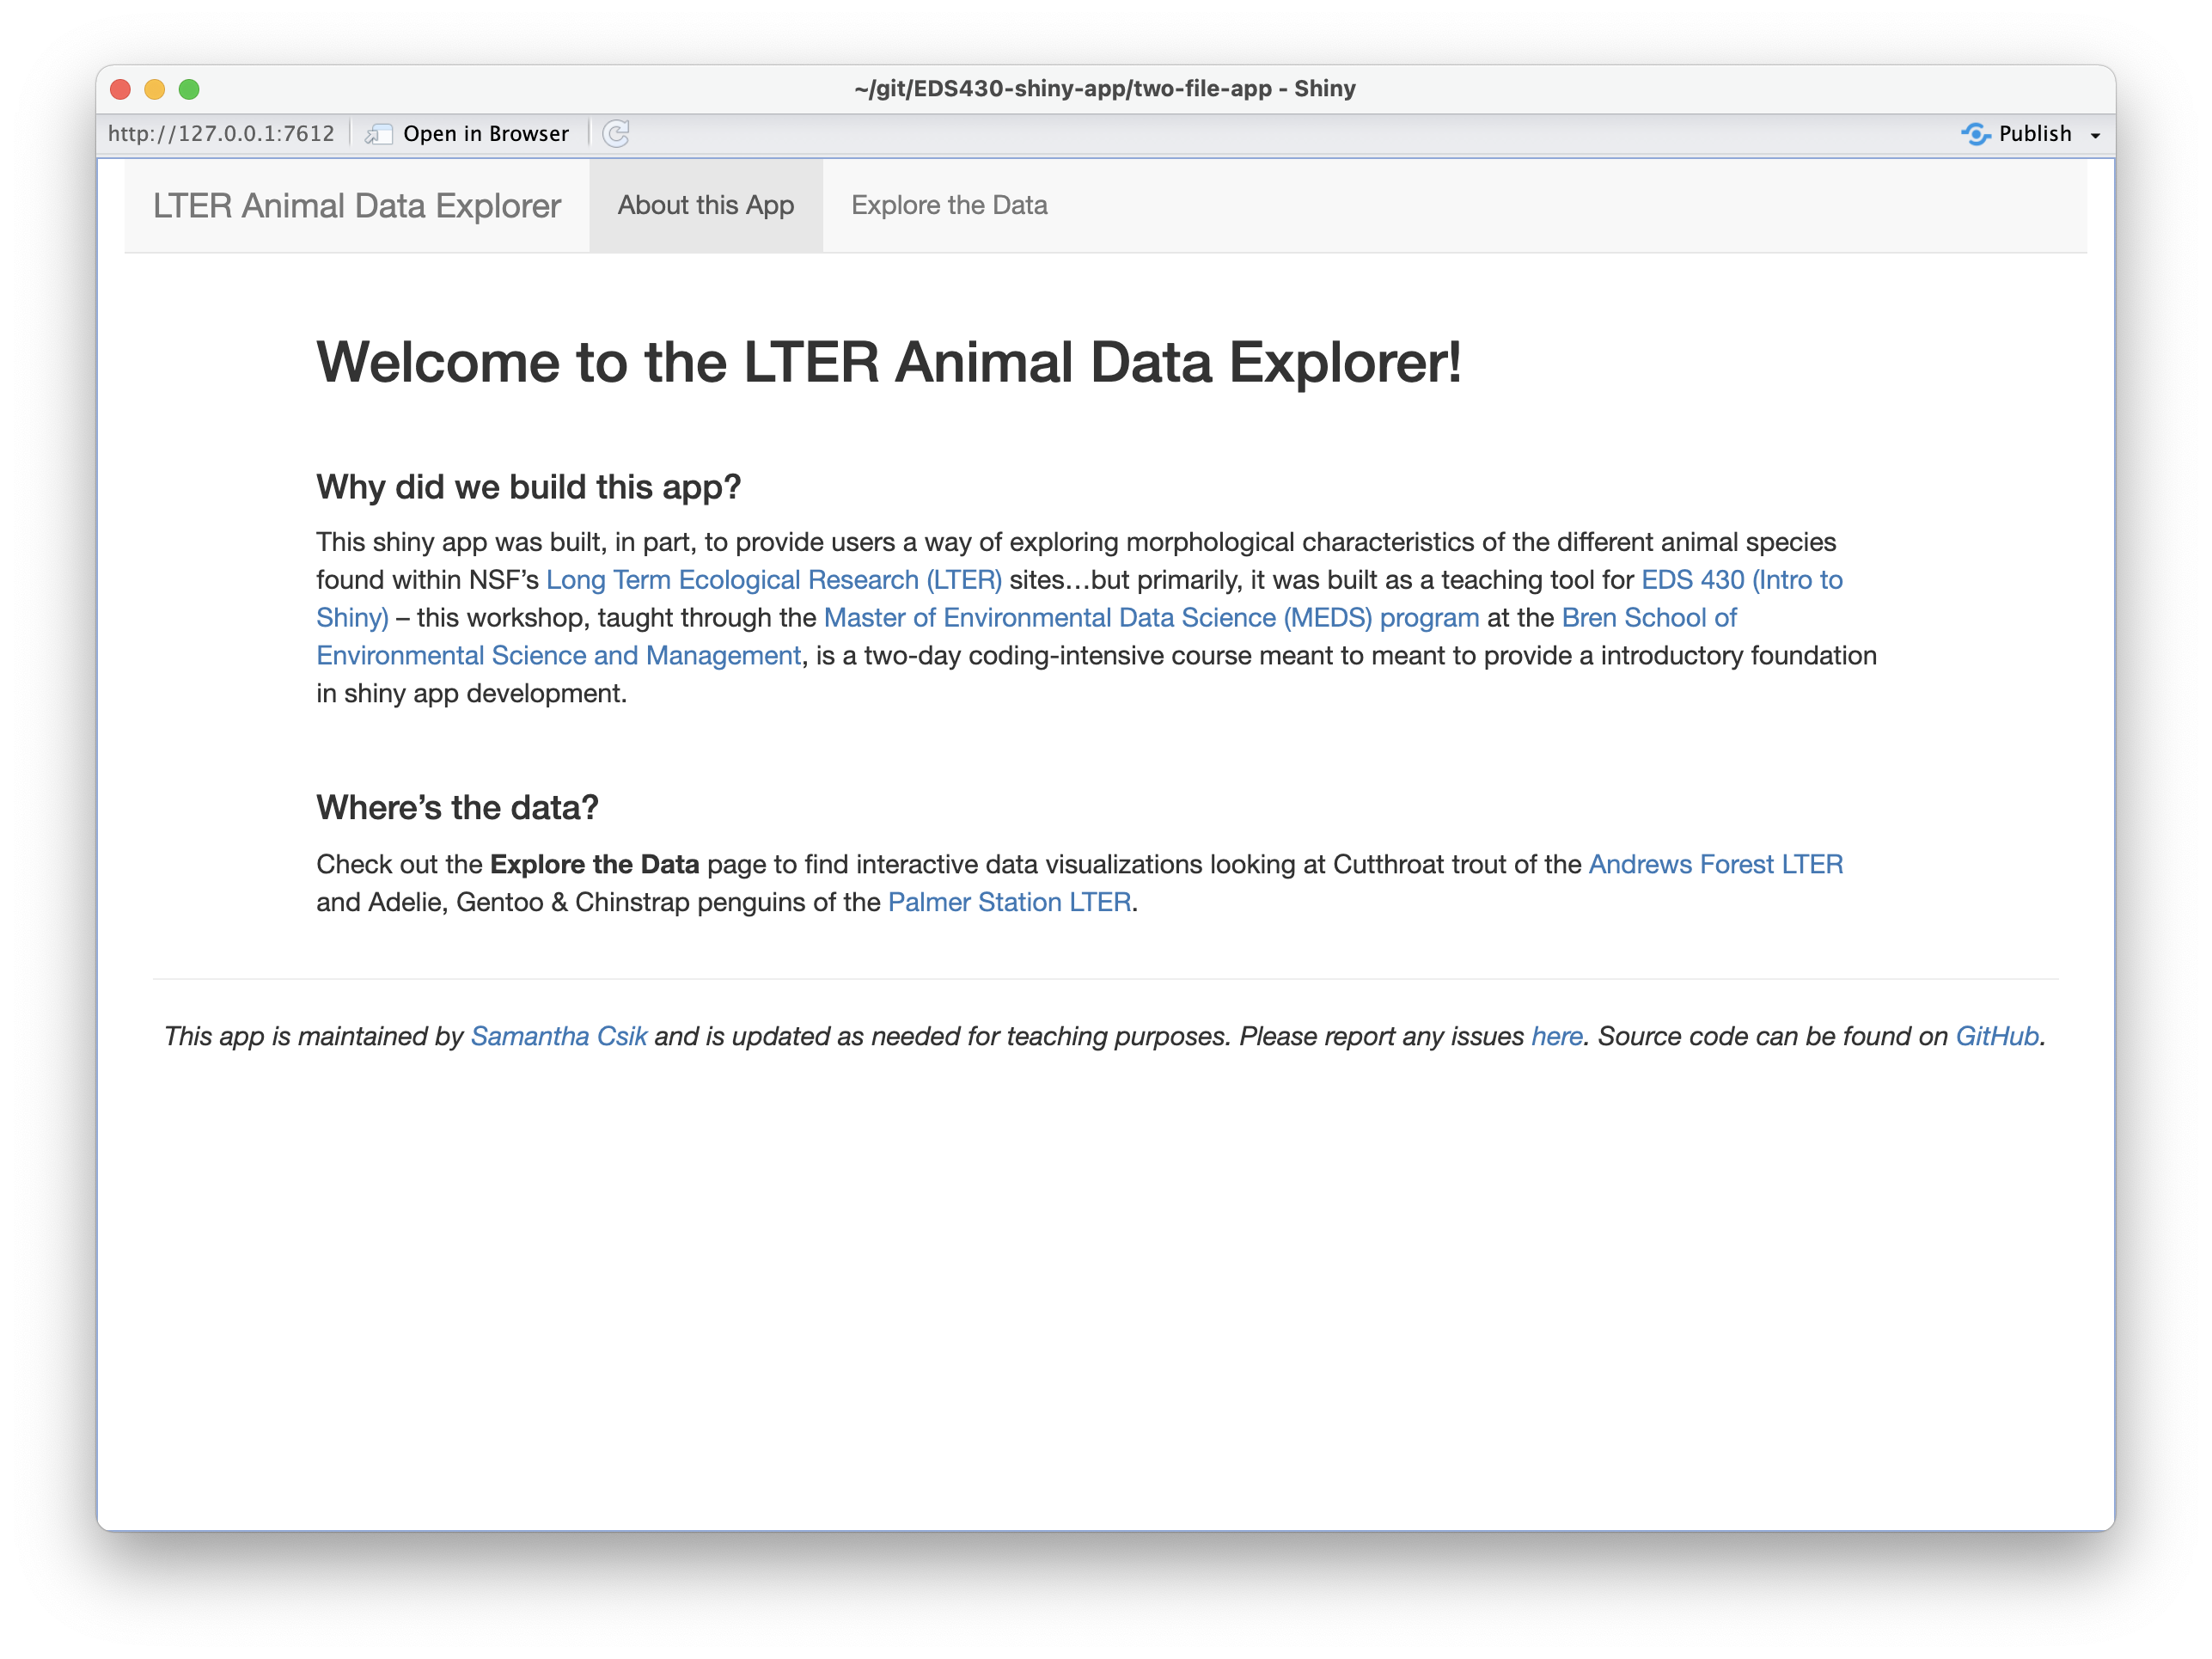 The landing page (i.e. the 'About this App' page) of ourapp, which includes a large h1 title that says 'Welcome to the LTER Animal Data Explorer!' followed by two subsections titled, 'Why did we build this app?' and 'Where's the data?'. A faint gray horizontal divider line separates these sections from the footer at the bottom of the page, which tells the user that the app is maintained by Samantha Csik, is updated as needed for teaching purposes, to report issues at a link, and that source code is found on GitHub.